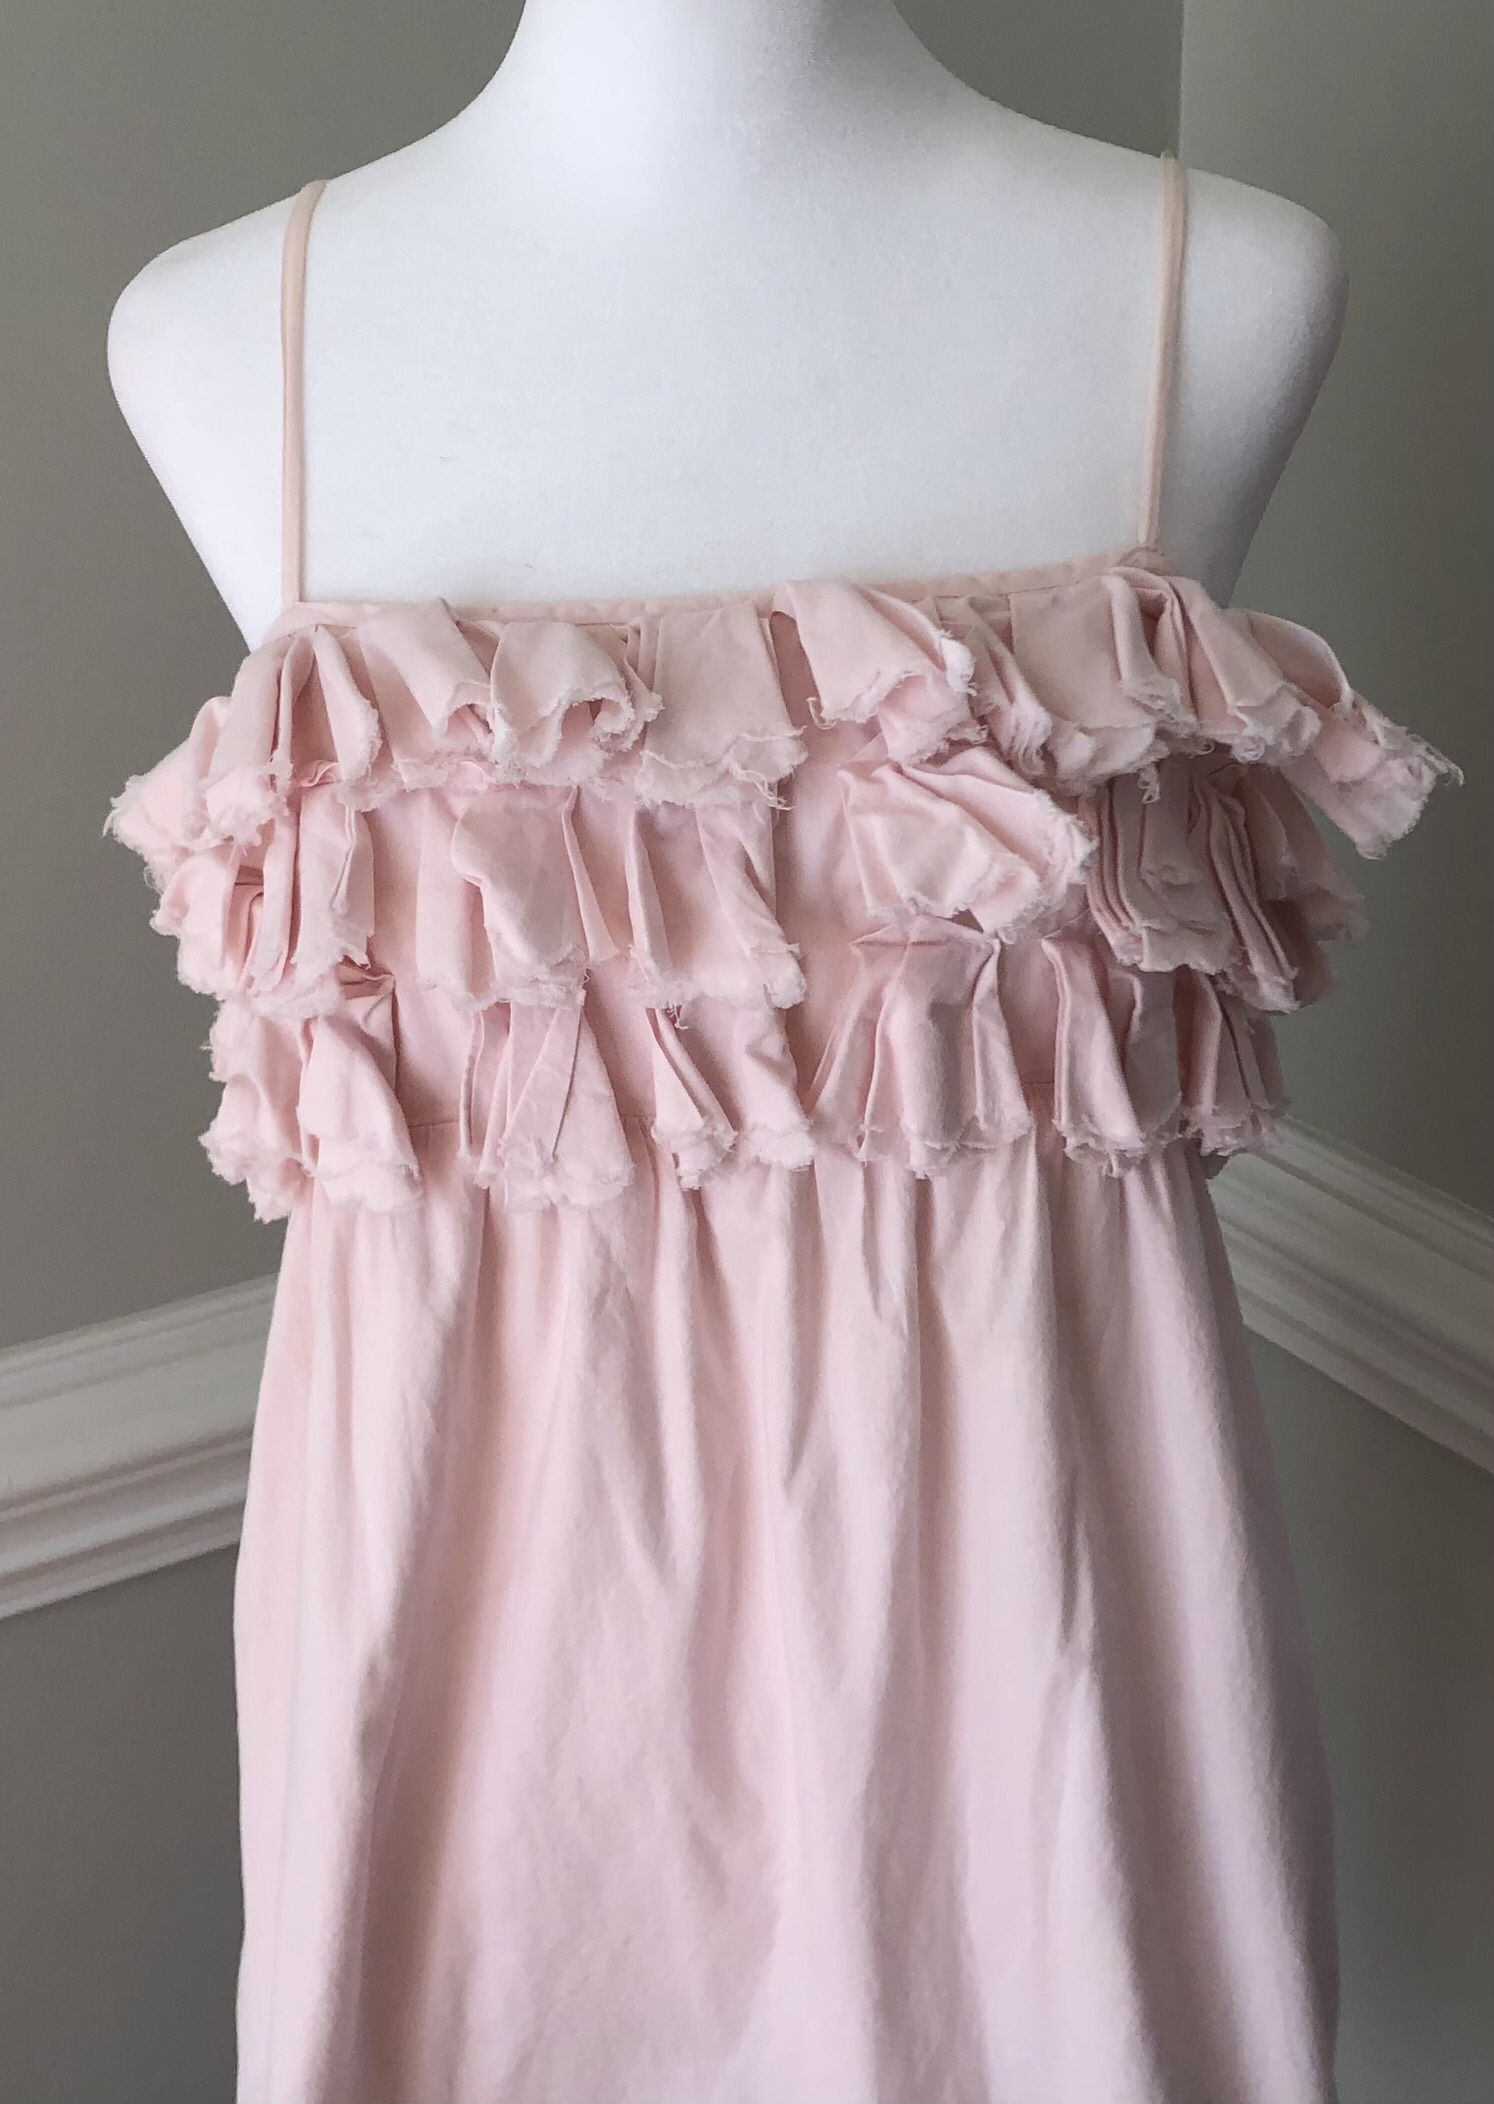 Like New, Sundress with Ruffles in Pale Pink from JCrew Factory (medium)